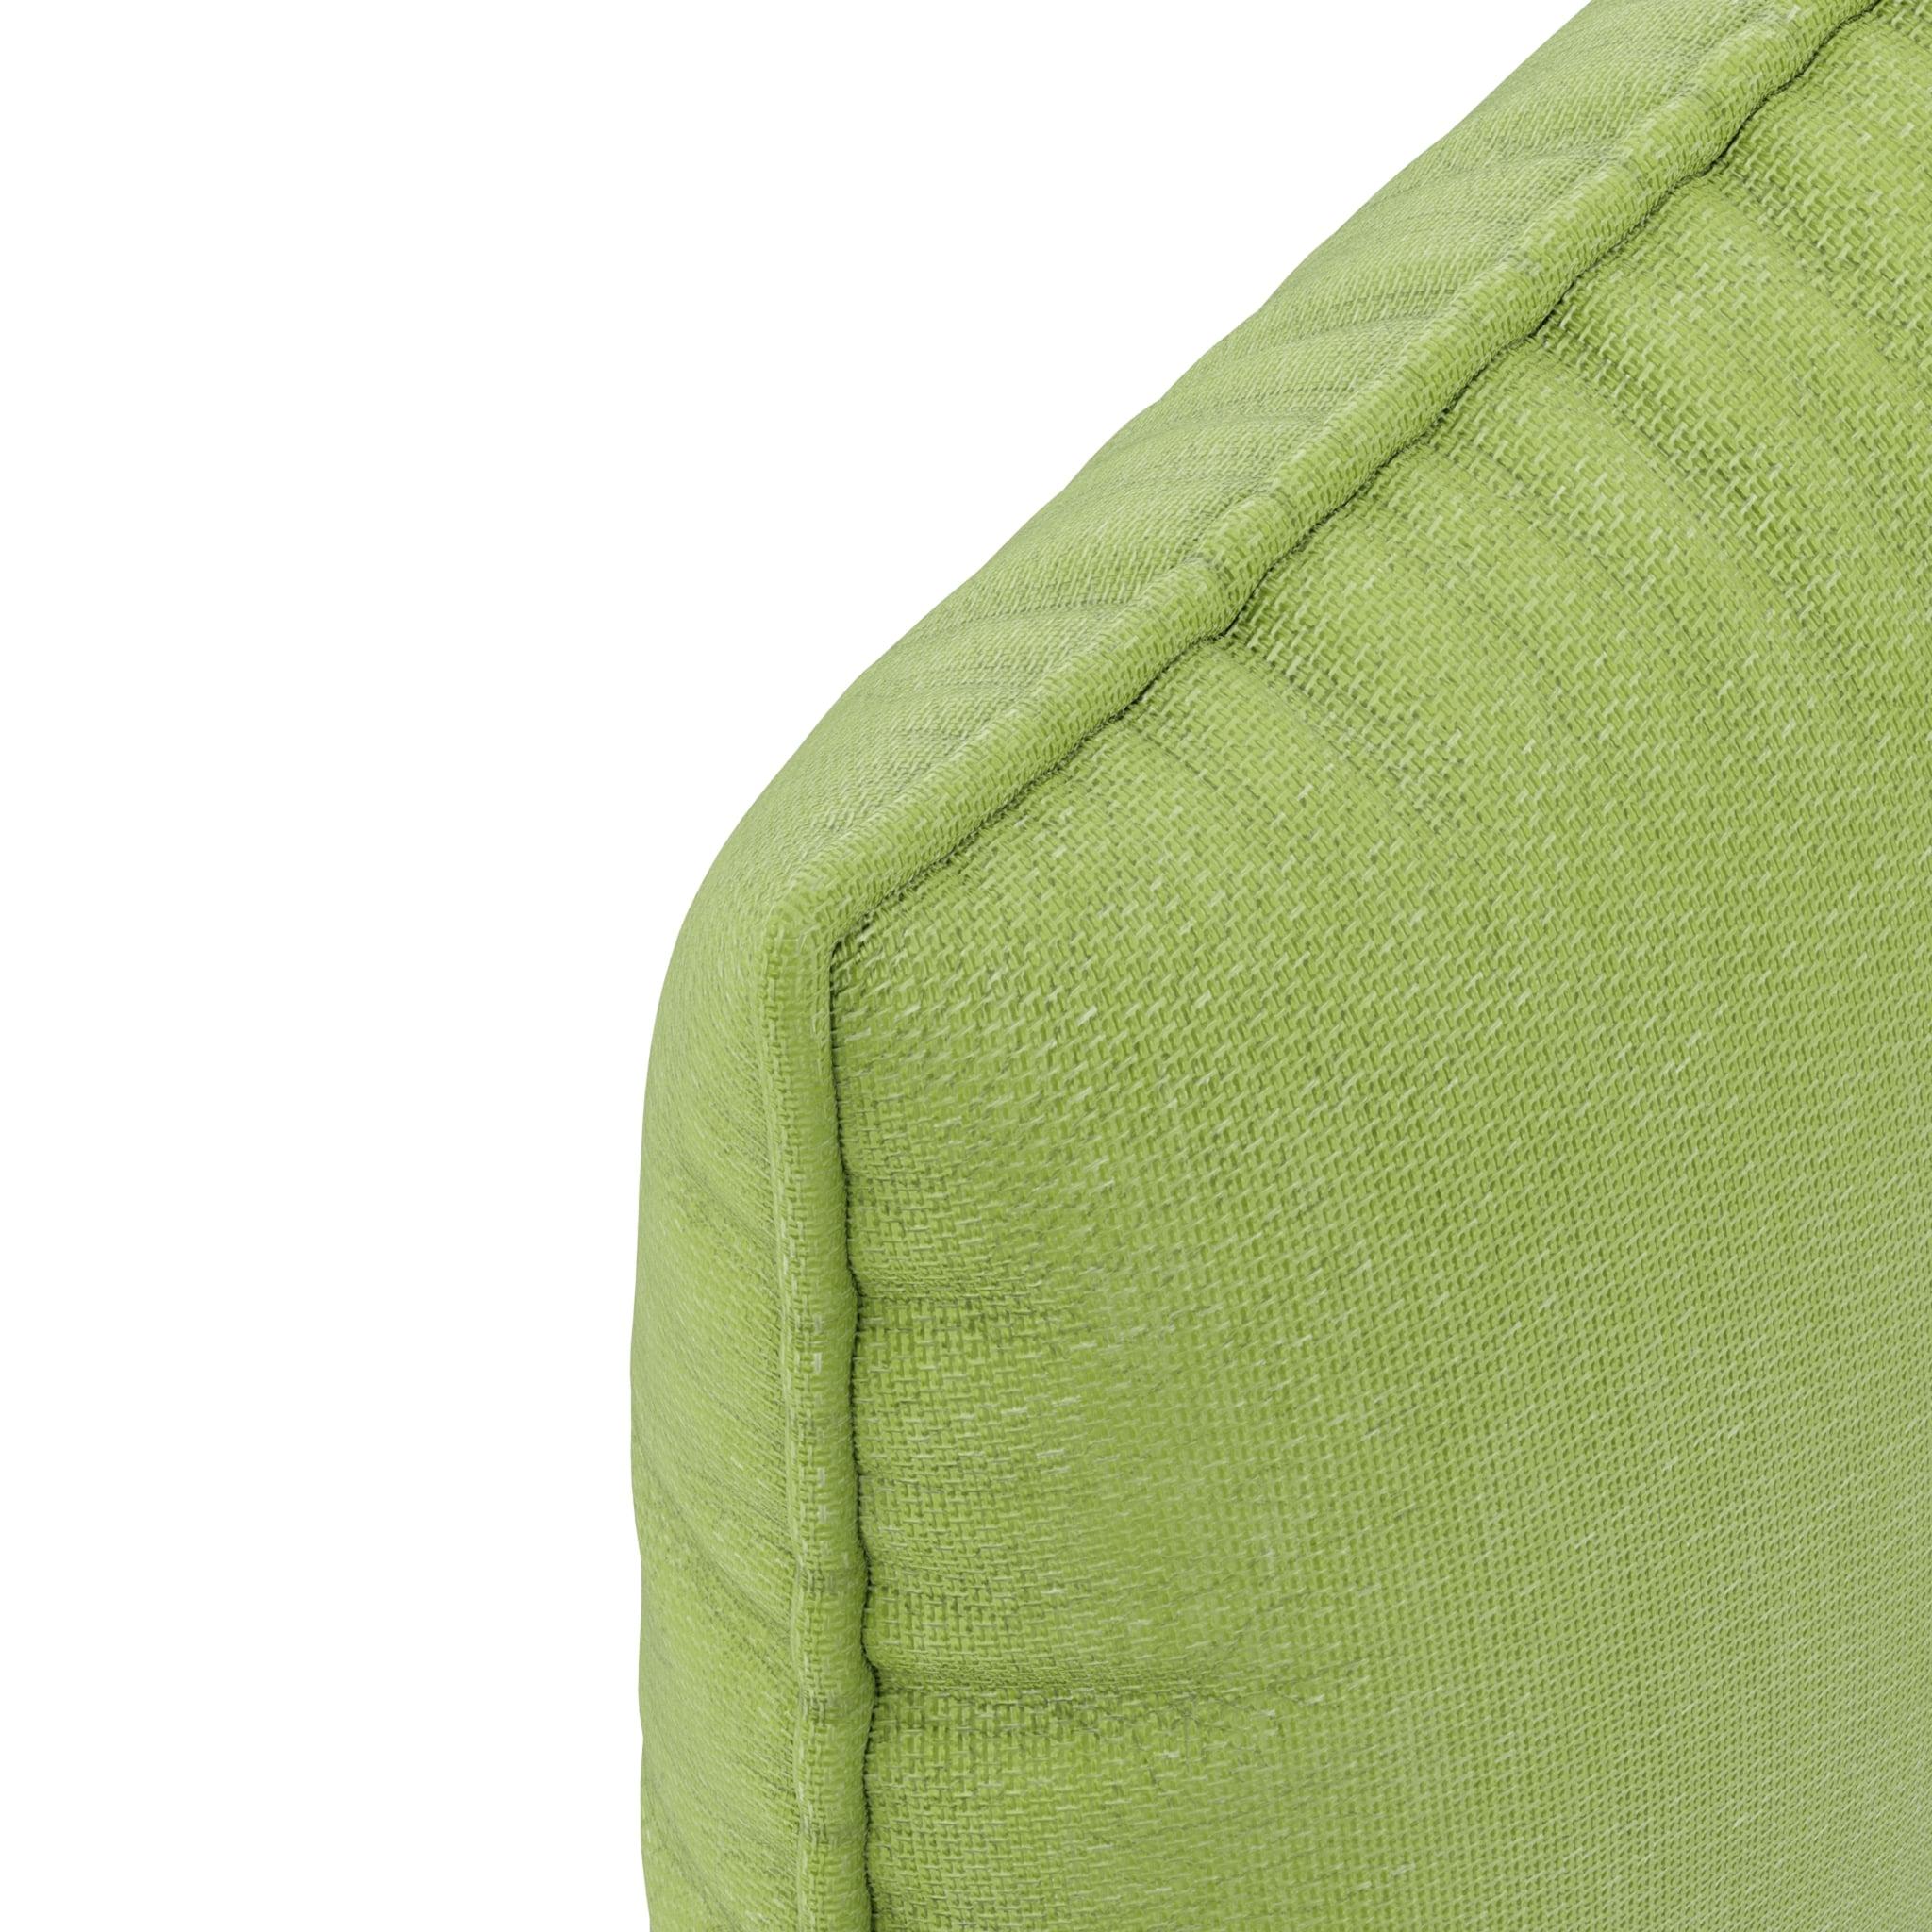 Jacquard Green pillow is a square cushion with piping. The textured fabric adds extra elegance to your modern home decor. This refreshing item can be used as a throw pillow for your sofa, daybed or chair. The earthy tone is easily matched with other